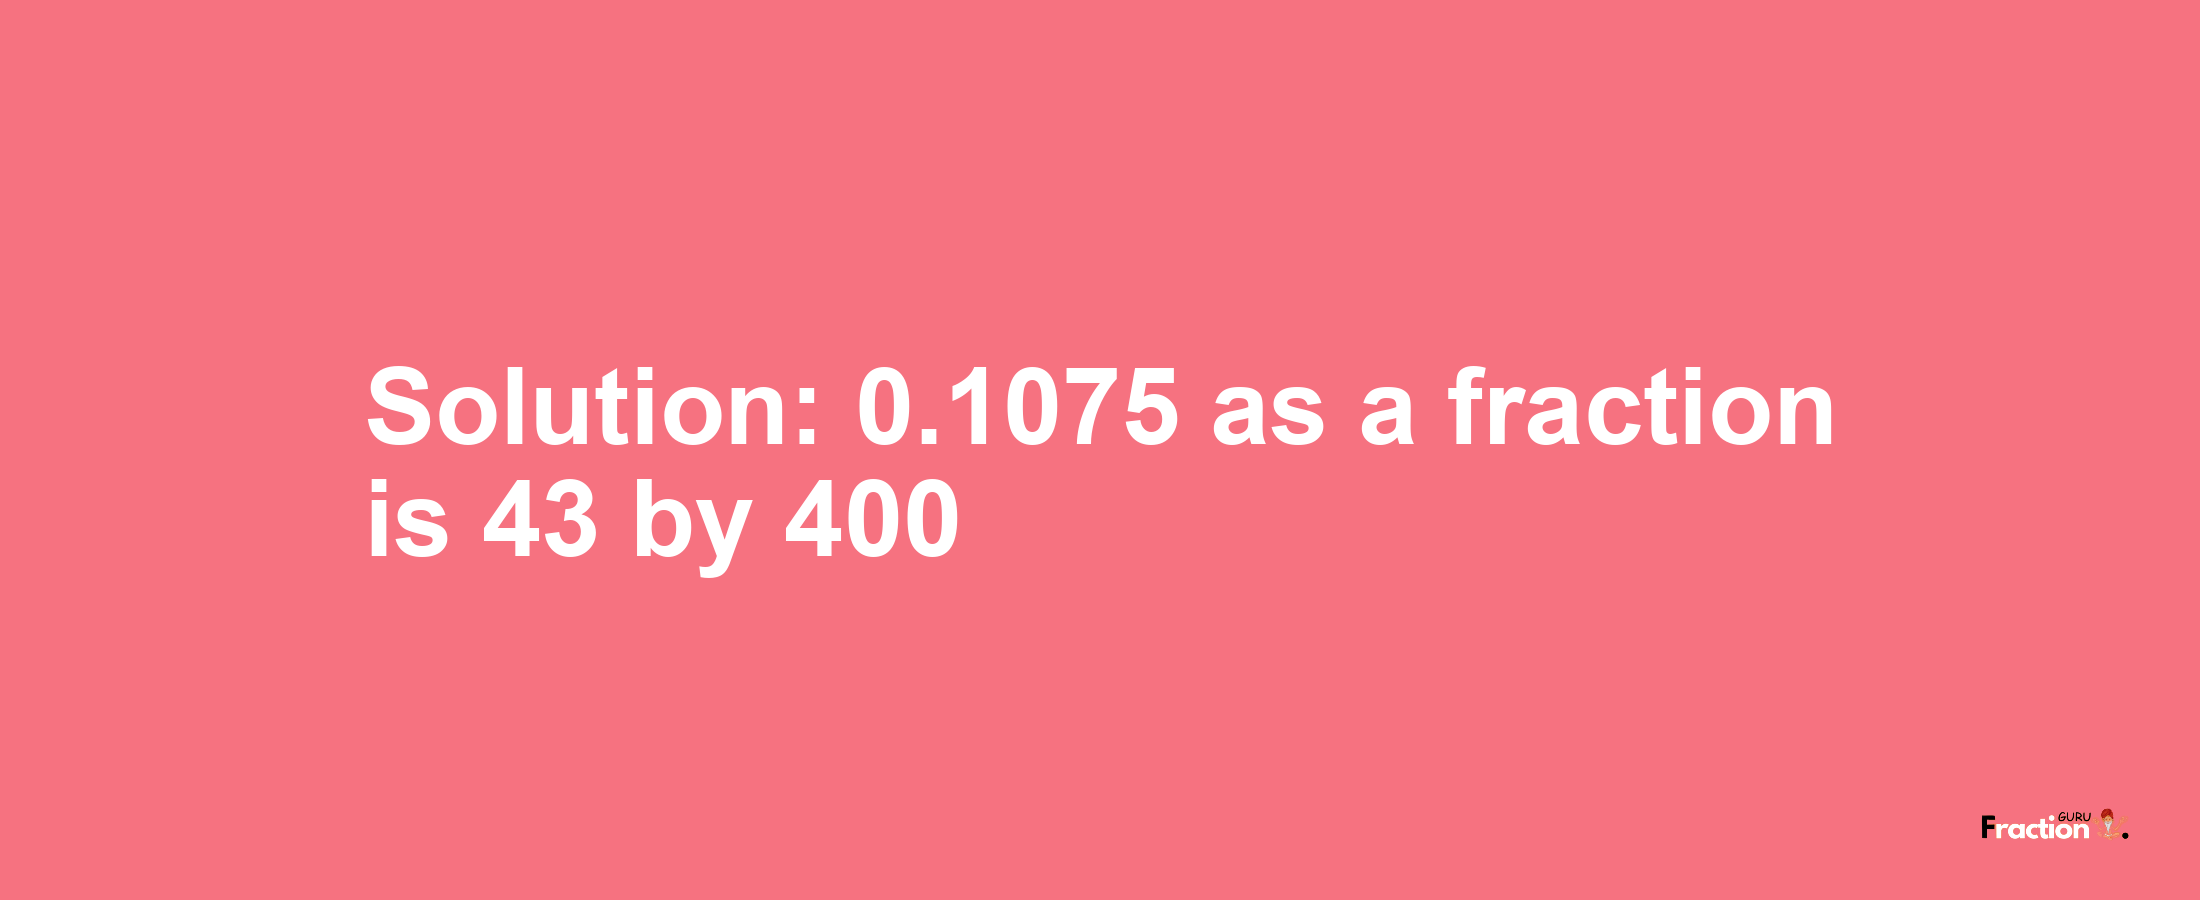 Solution:0.1075 as a fraction is 43/400